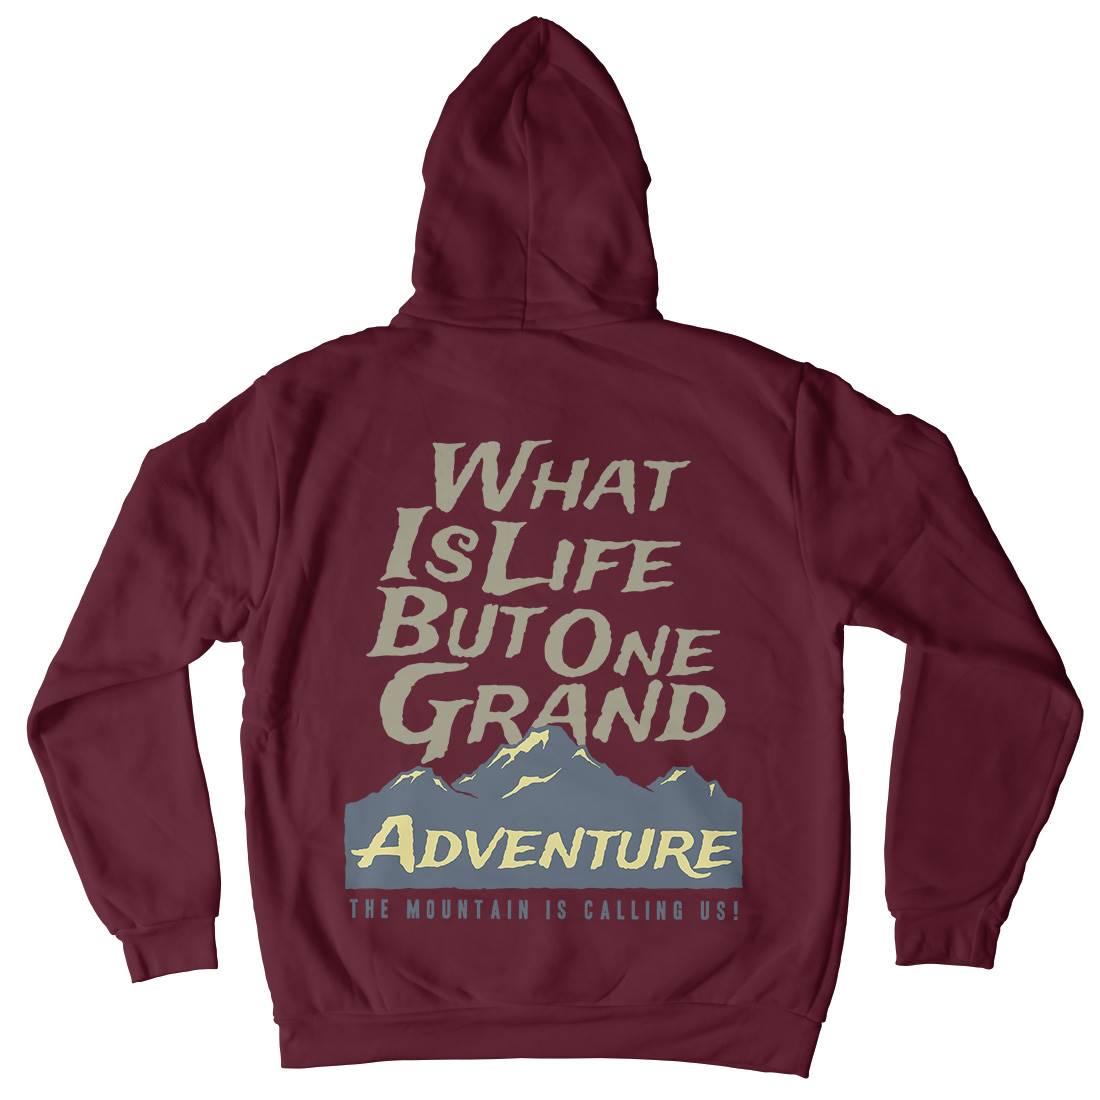 Great Adventure Mens Hoodie With Pocket Nature A321